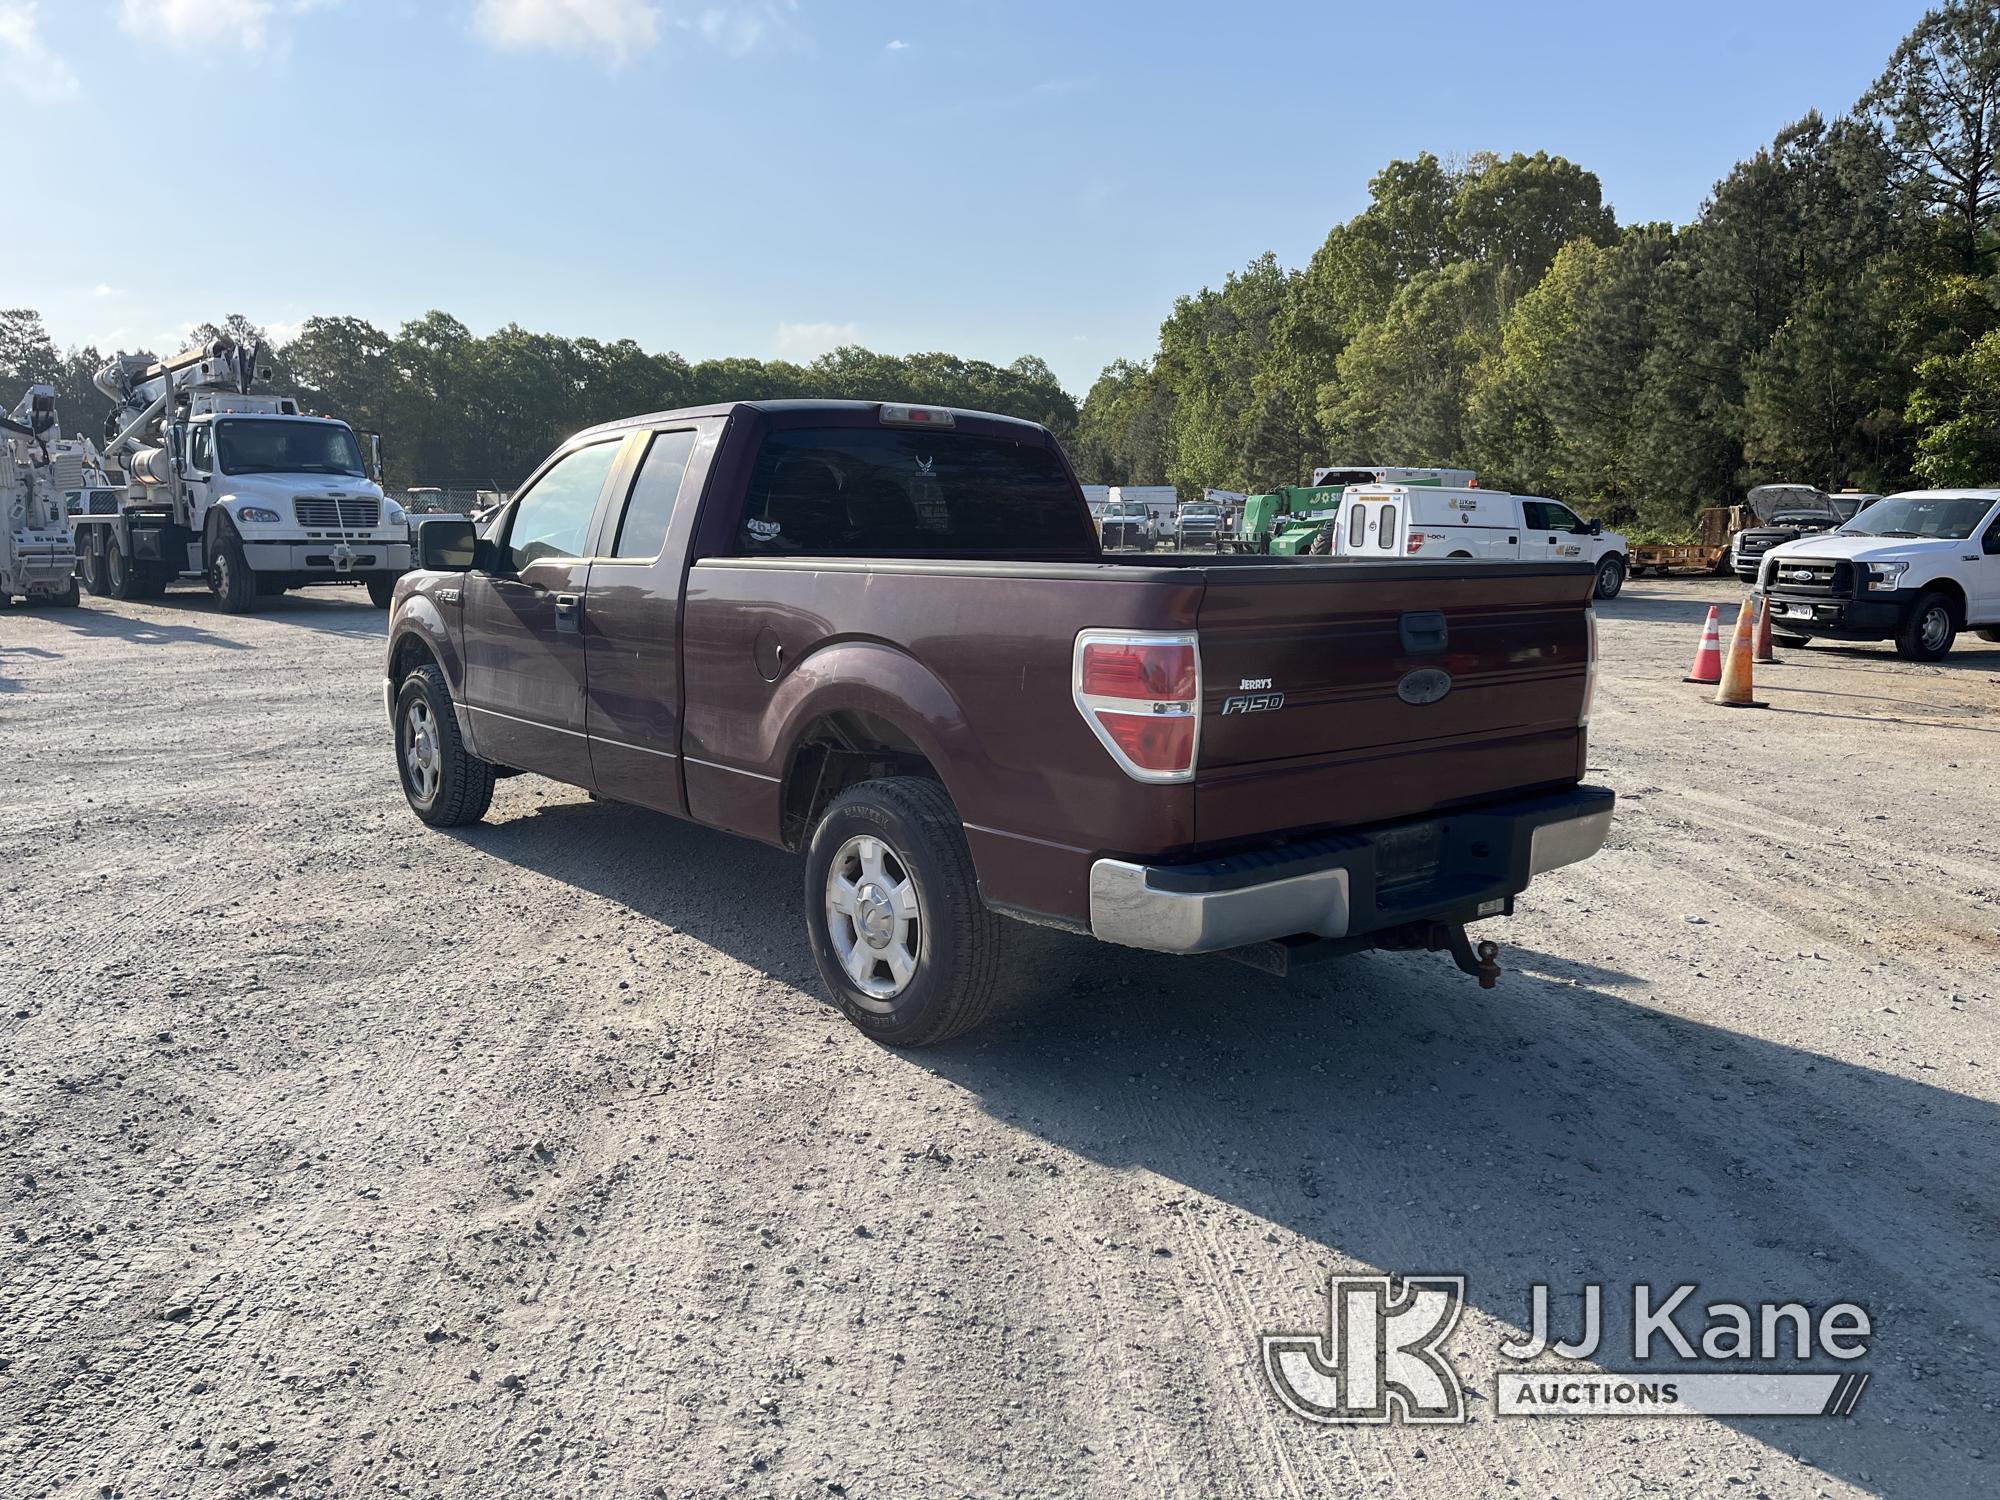 (Chester, VA) 2010 Ford F150 Extended-Cab Pickup Truck Runs & Moves